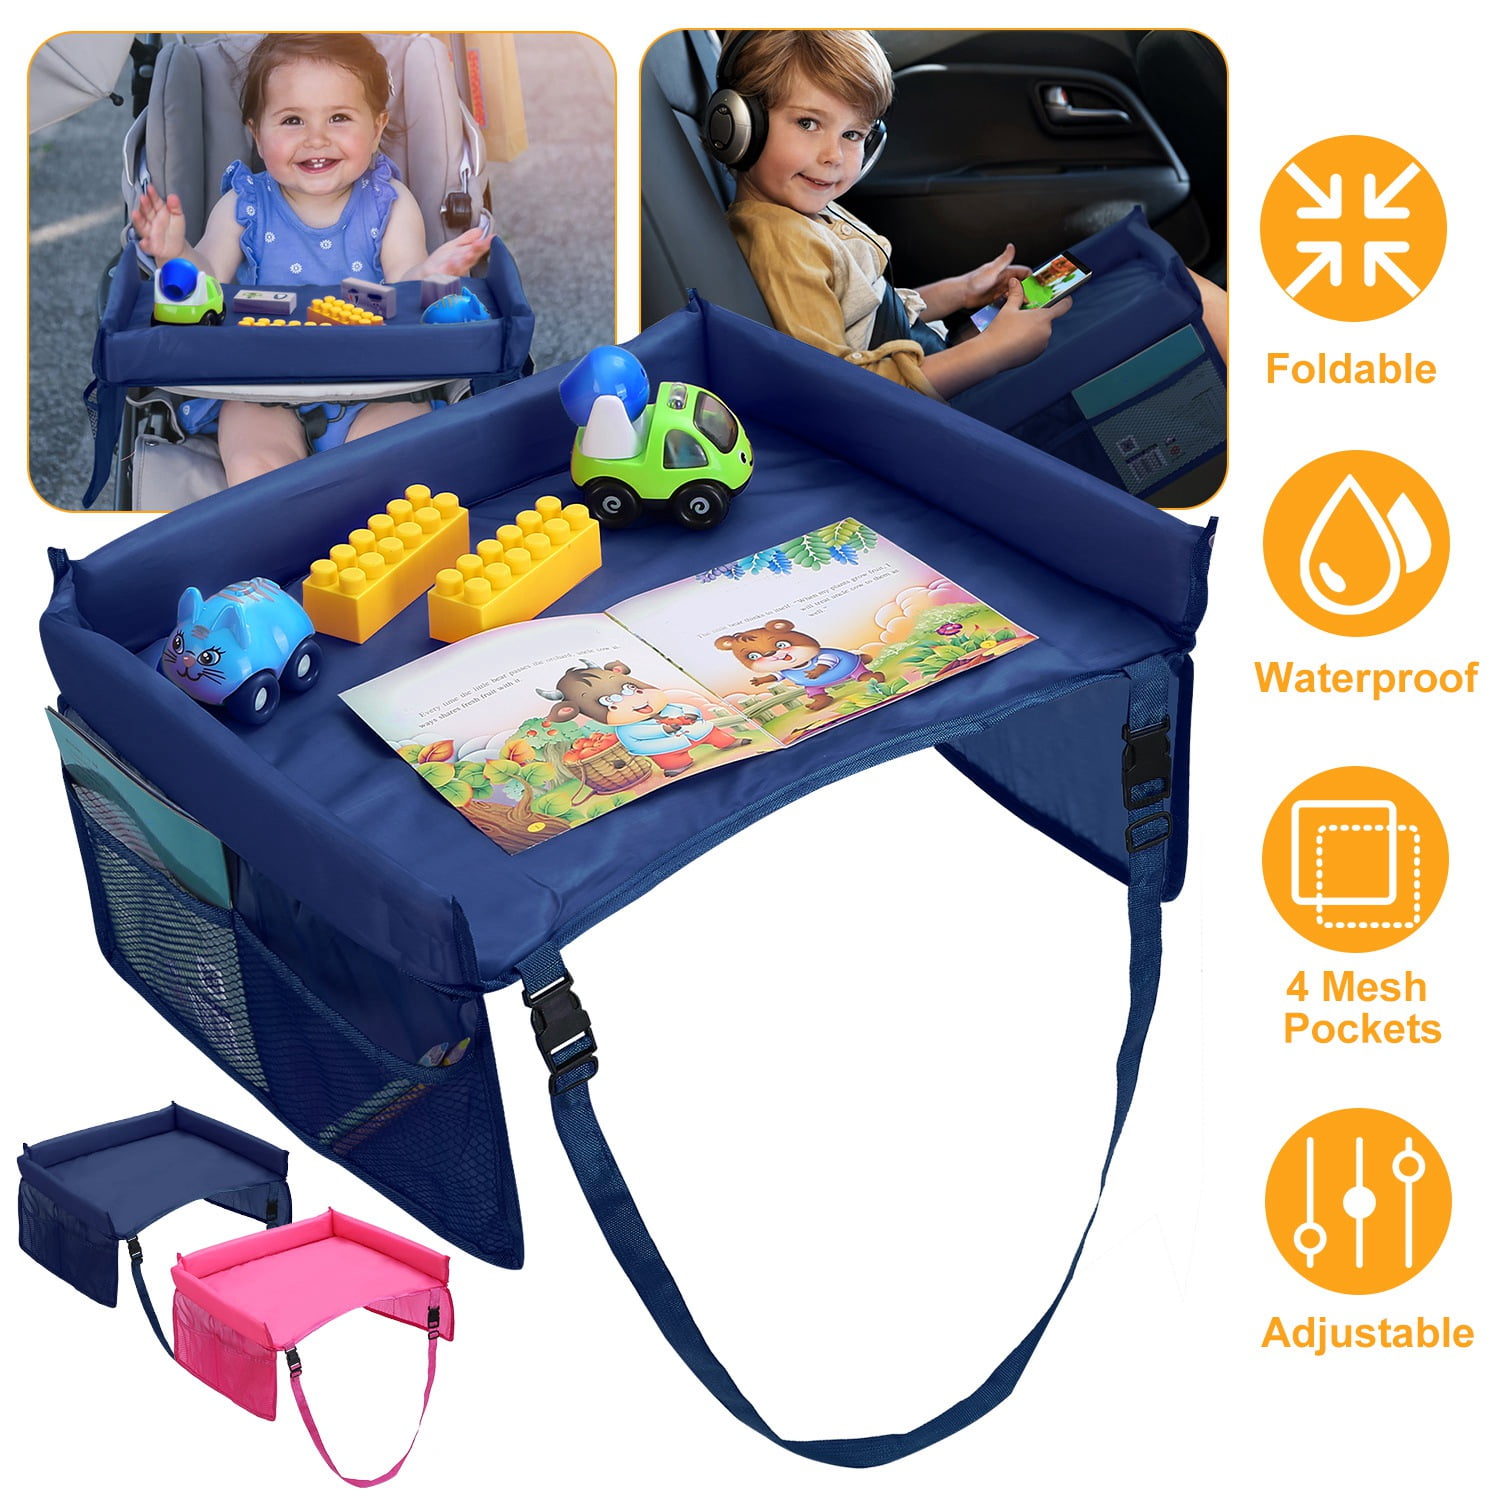 LC_ Child Car Seat Play Tray Storage Kid's Toy Holder Desk Stroller Board Lap 